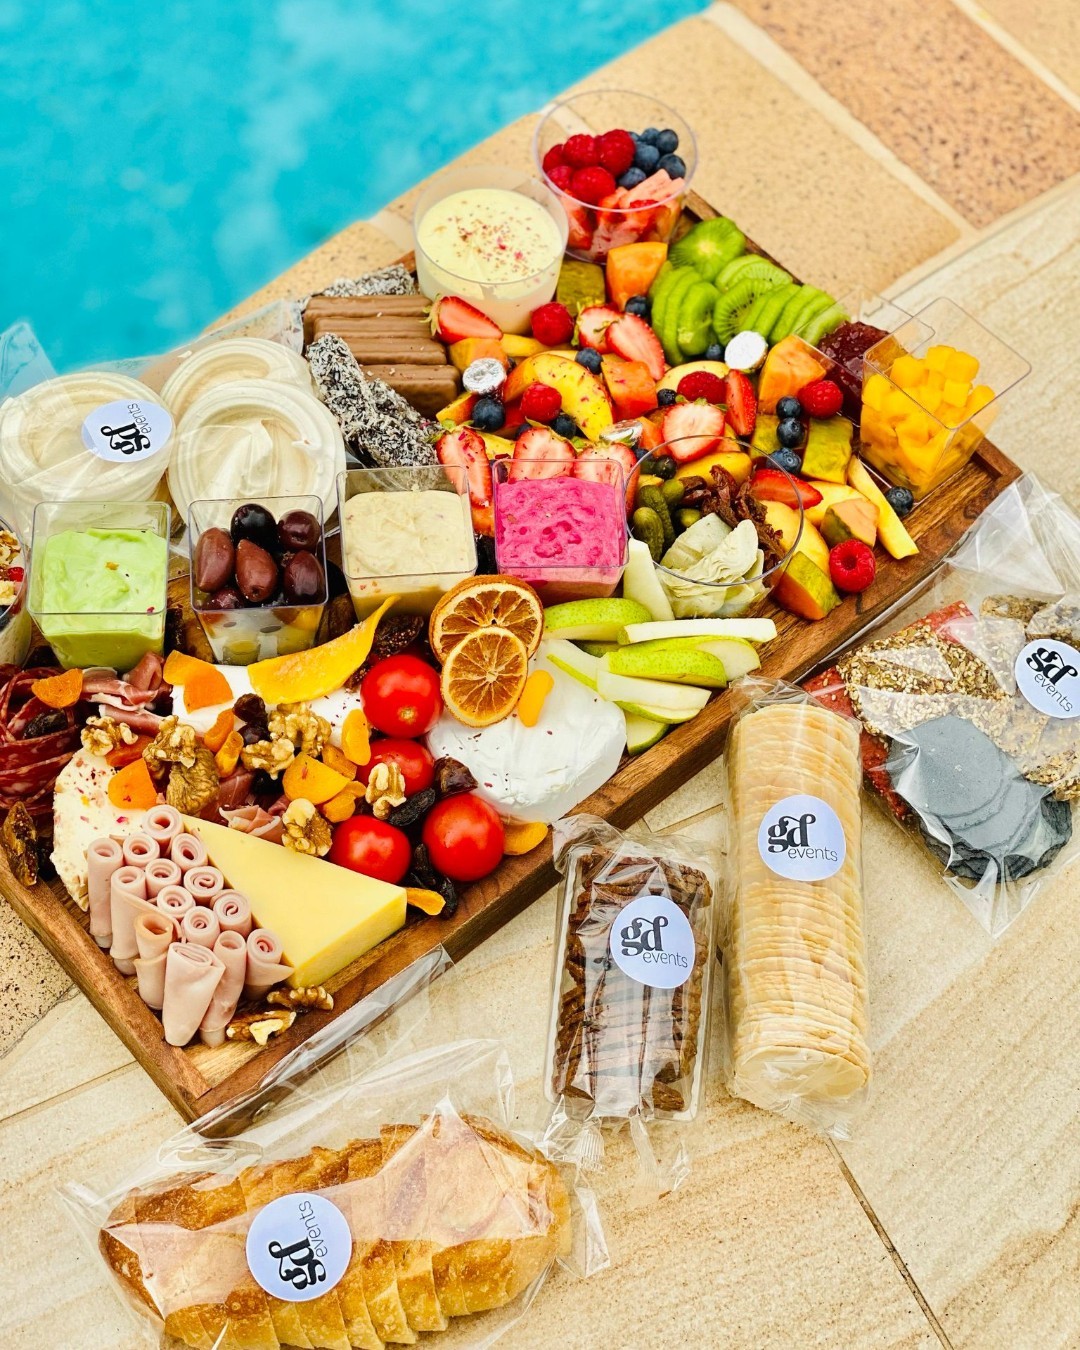 Grazing table ideas, Grazing table ideas for your next party to get your mouth watering